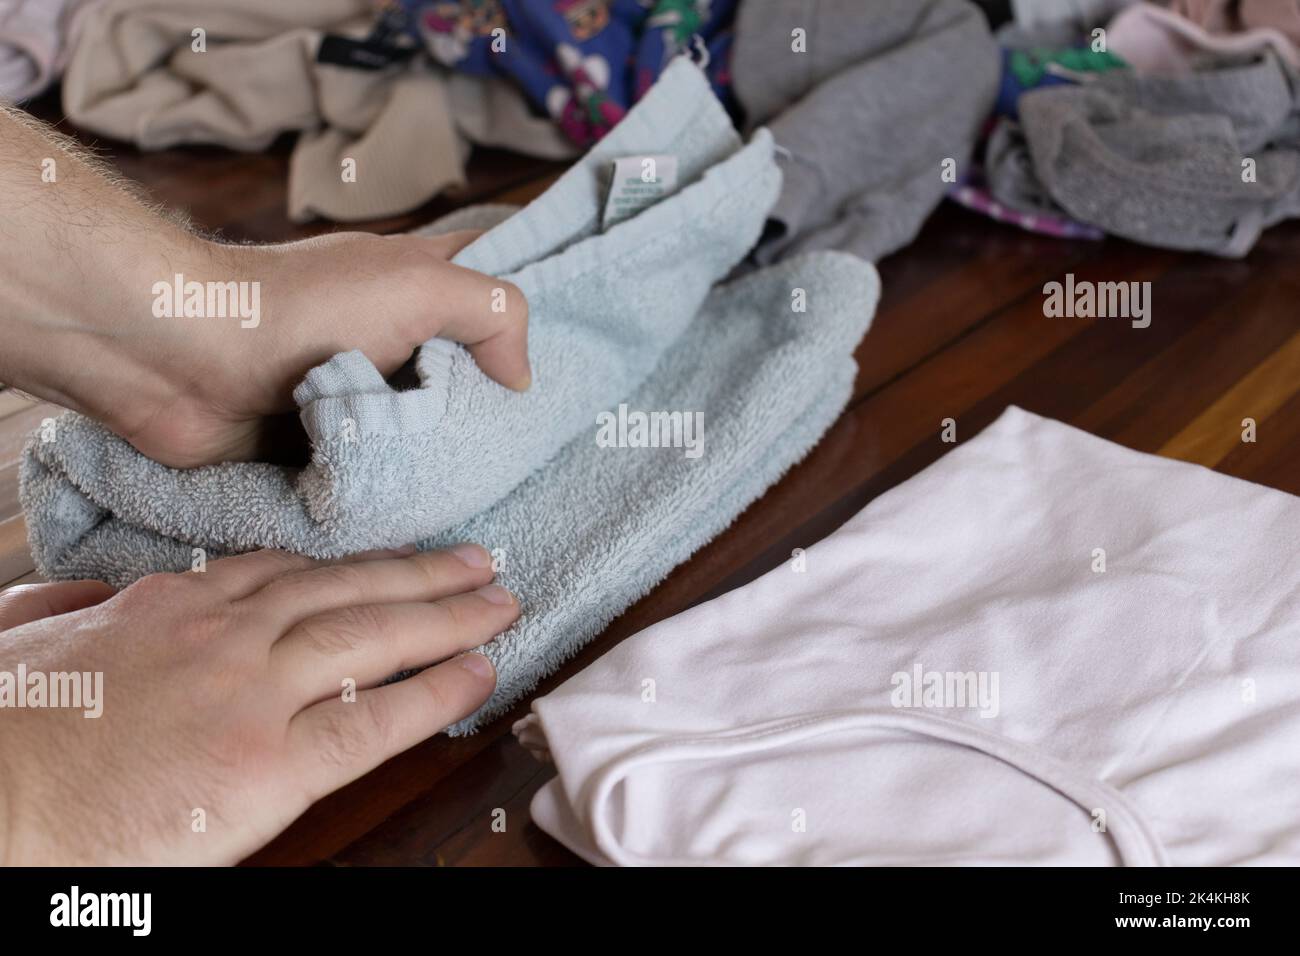 Married man arranging freshly washed clothes Stock Photo